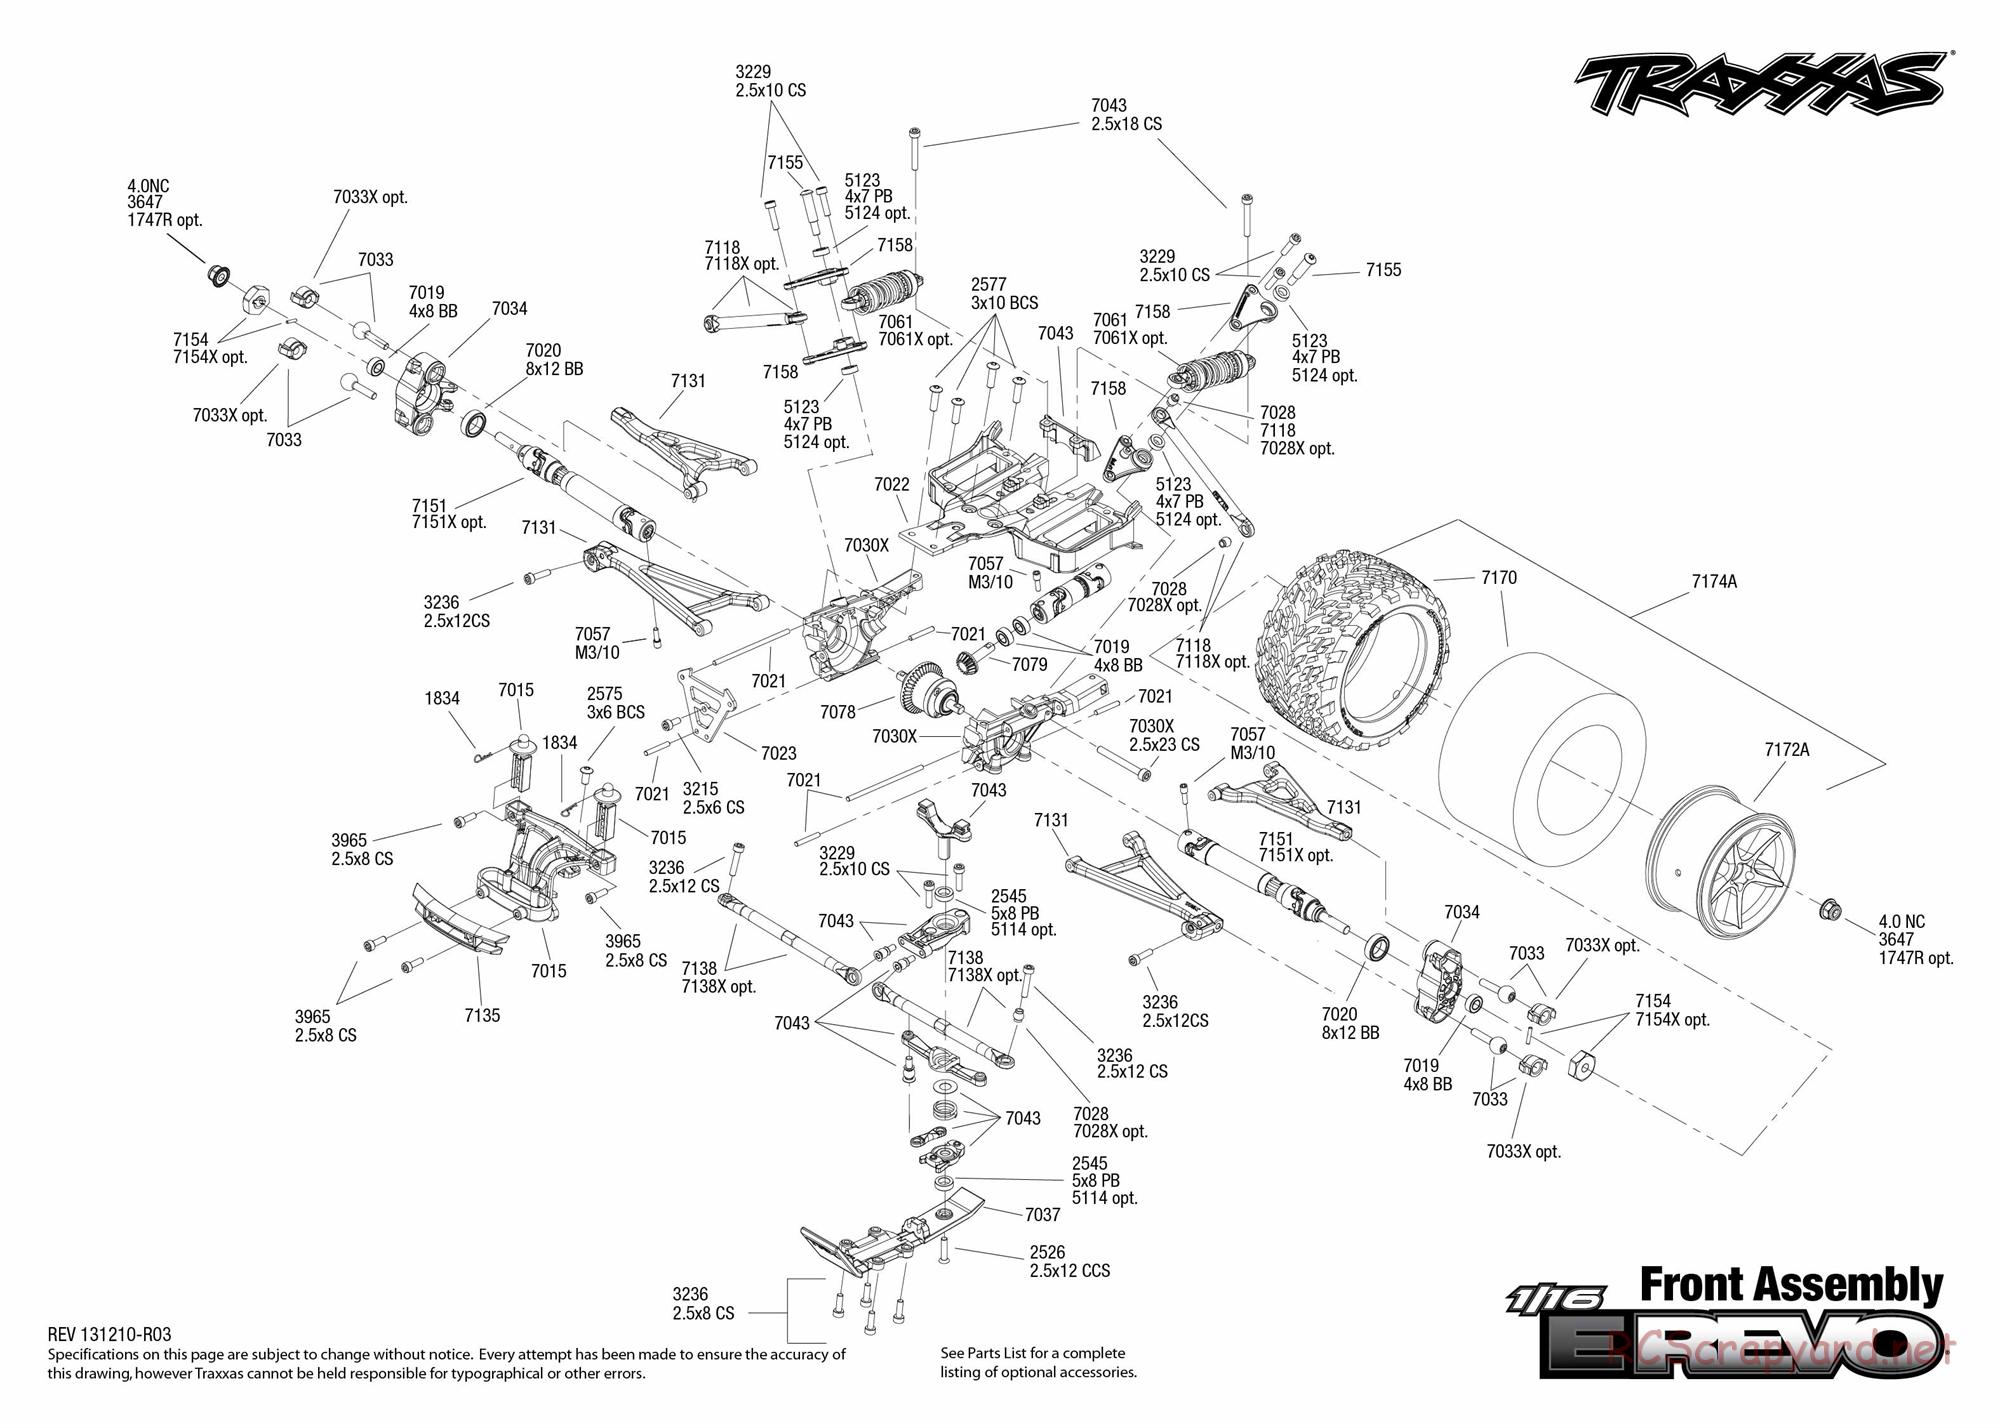 Traxxas - 1/16 E-Revo Brushed (2013) - Exploded Views - Page 3